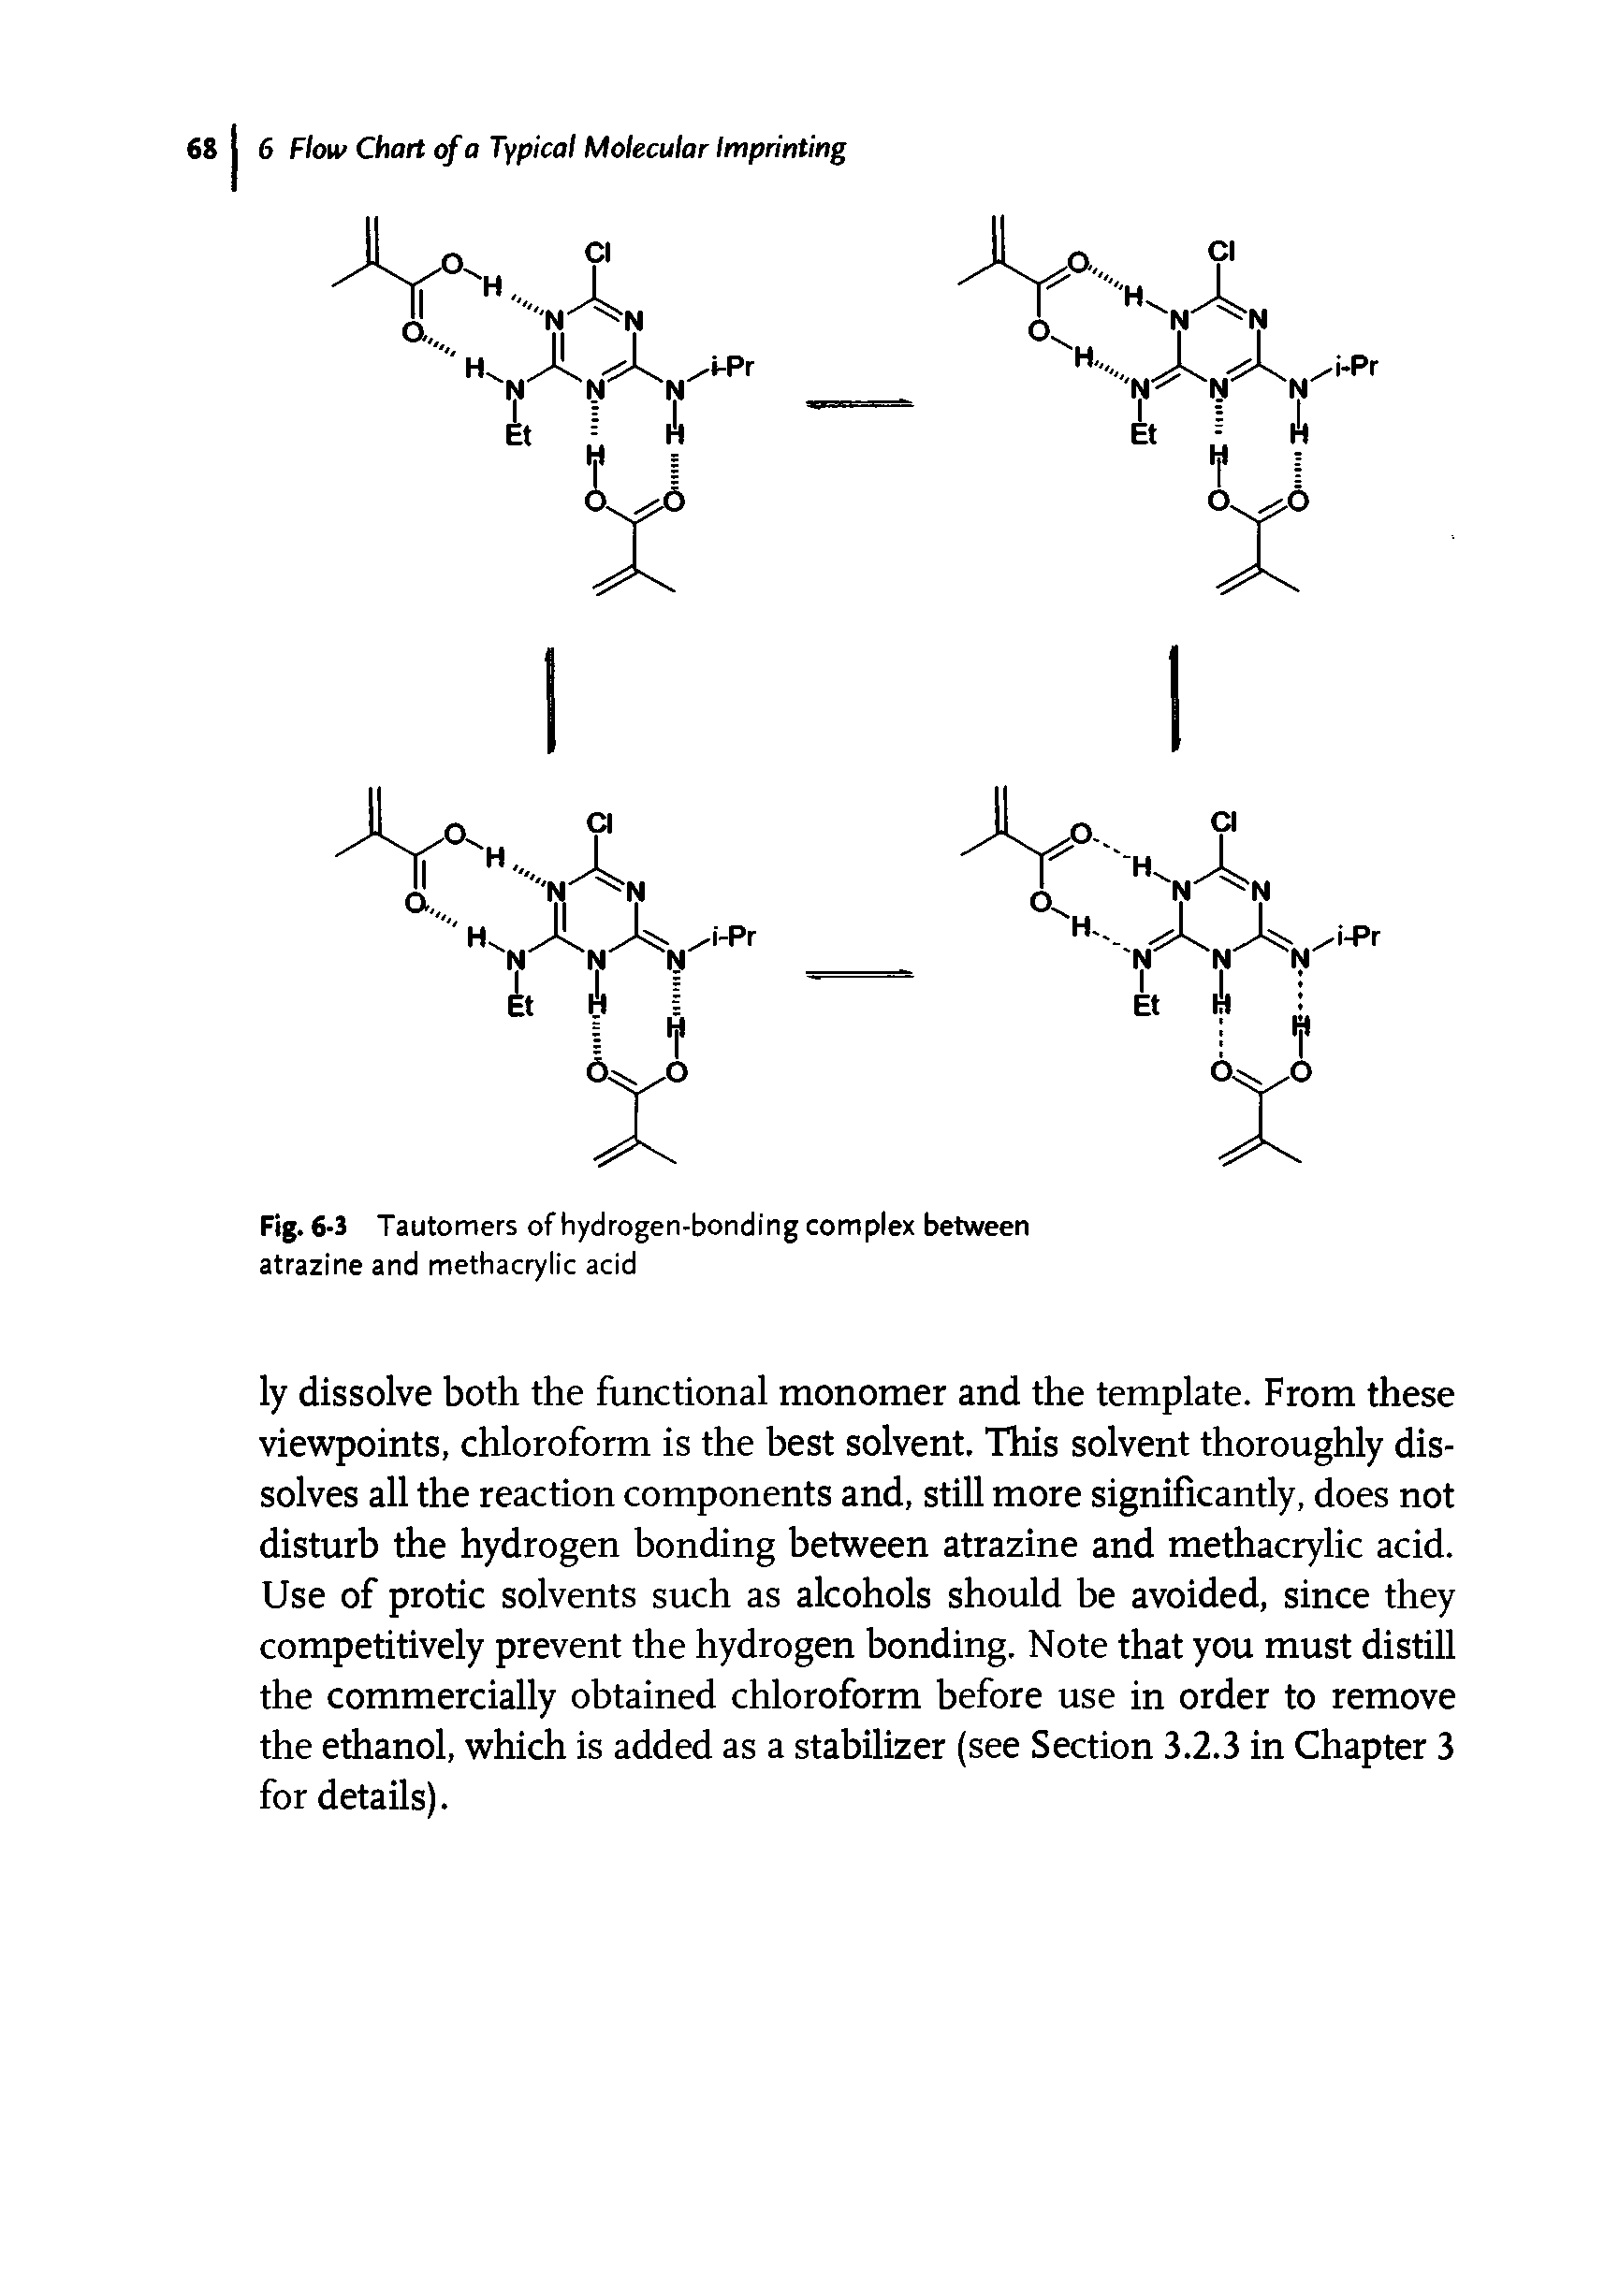 Fig. 6-3 Tautomers of hydrogen-bonding complex between atrazine and methacrylic acid...